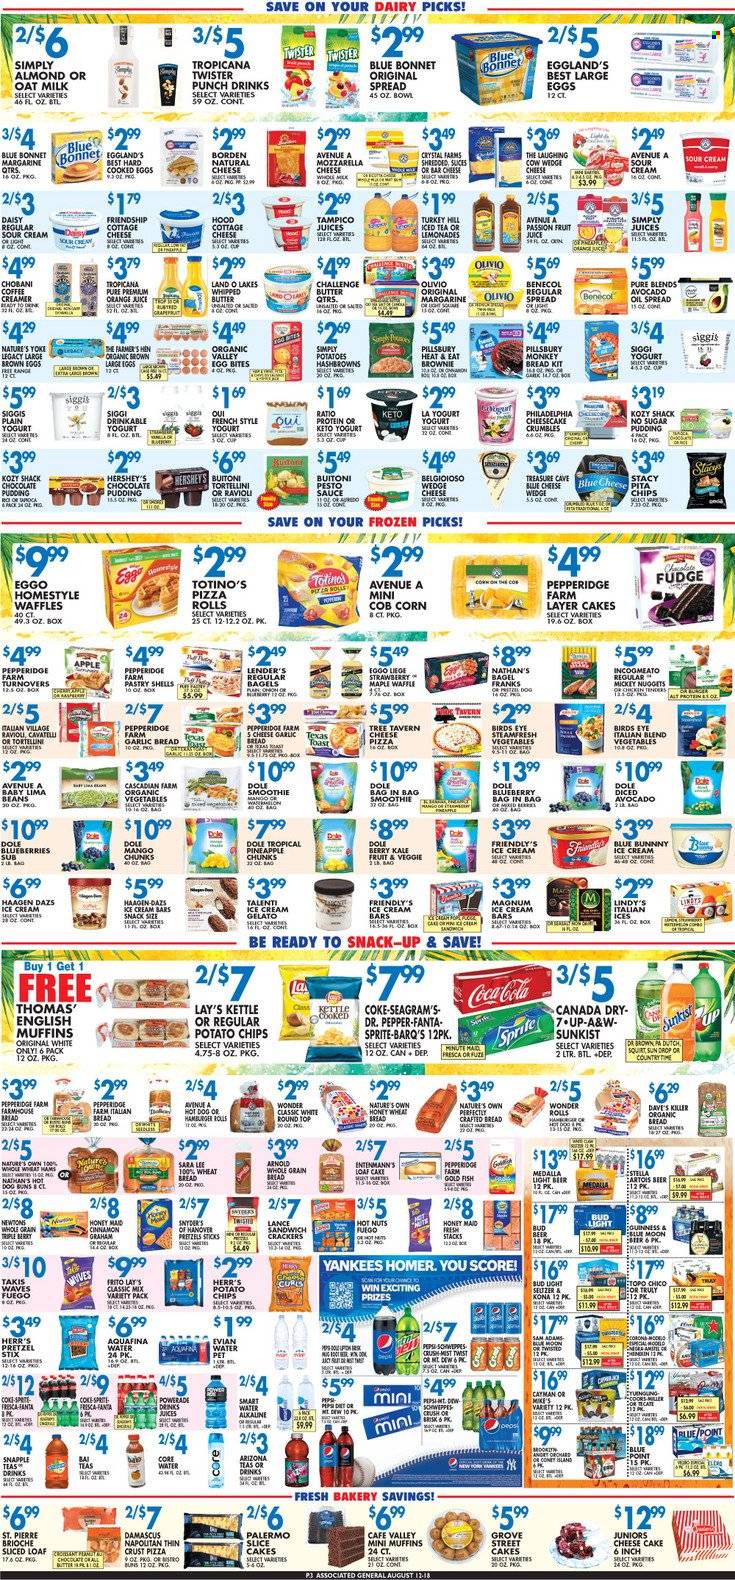 thumbnail - Associated Supermarkets Flyer - 08/12/2022 - 08/18/2022 - Sales products - bagels, english muffins, wheat bread, pretzels, cake, pizza rolls, buns, burger buns, brioche, Sara Lee, turnovers, brownies, waffles, loaf cake, Entenmann's, corn, kale, Dole, grapefruits, watermelon, pineapple, fish, ravioli, pizza, nuggets, hamburger, sauce, tortellini, Pillsbury, Bird's Eye, Buitoni, cottage cheese, Philadelphia, The Laughing Cow, pudding, chocolate pudding, yoghurt, Chobani, milk, Milo, oat milk, large eggs, margarine, whipped butter, sour cream, creamer, ice cream, ice cream bars, ice cream sandwich, Hershey's, Häagen-Dazs, Talenti Gelato, Friendly's Ice Cream, gelato, lima beans, hash browns, fudge, snack, crackers, potato chips, Lay’s, Honey Maid, cinnamon, pesto, avocado oil, oil, Canada Dry, Coca-Cola, Schweppes, Sprite, Powerade, Pepsi, orange juice, juice, Fanta, ice tea, Dr. Pepper, 7UP, AriZona, Snapple, A&W, Bai, Tropicana Twister, Country Time, fruit punch, smoothie, Aquafina, Smartwater, Evian, Hard Seltzer, TRULY, beer, Bud Light, Corona Extra, Guinness, Miller, Modelo, pet bed, bowl, Nature's Own, Coors, Blue Moon. Page 3.